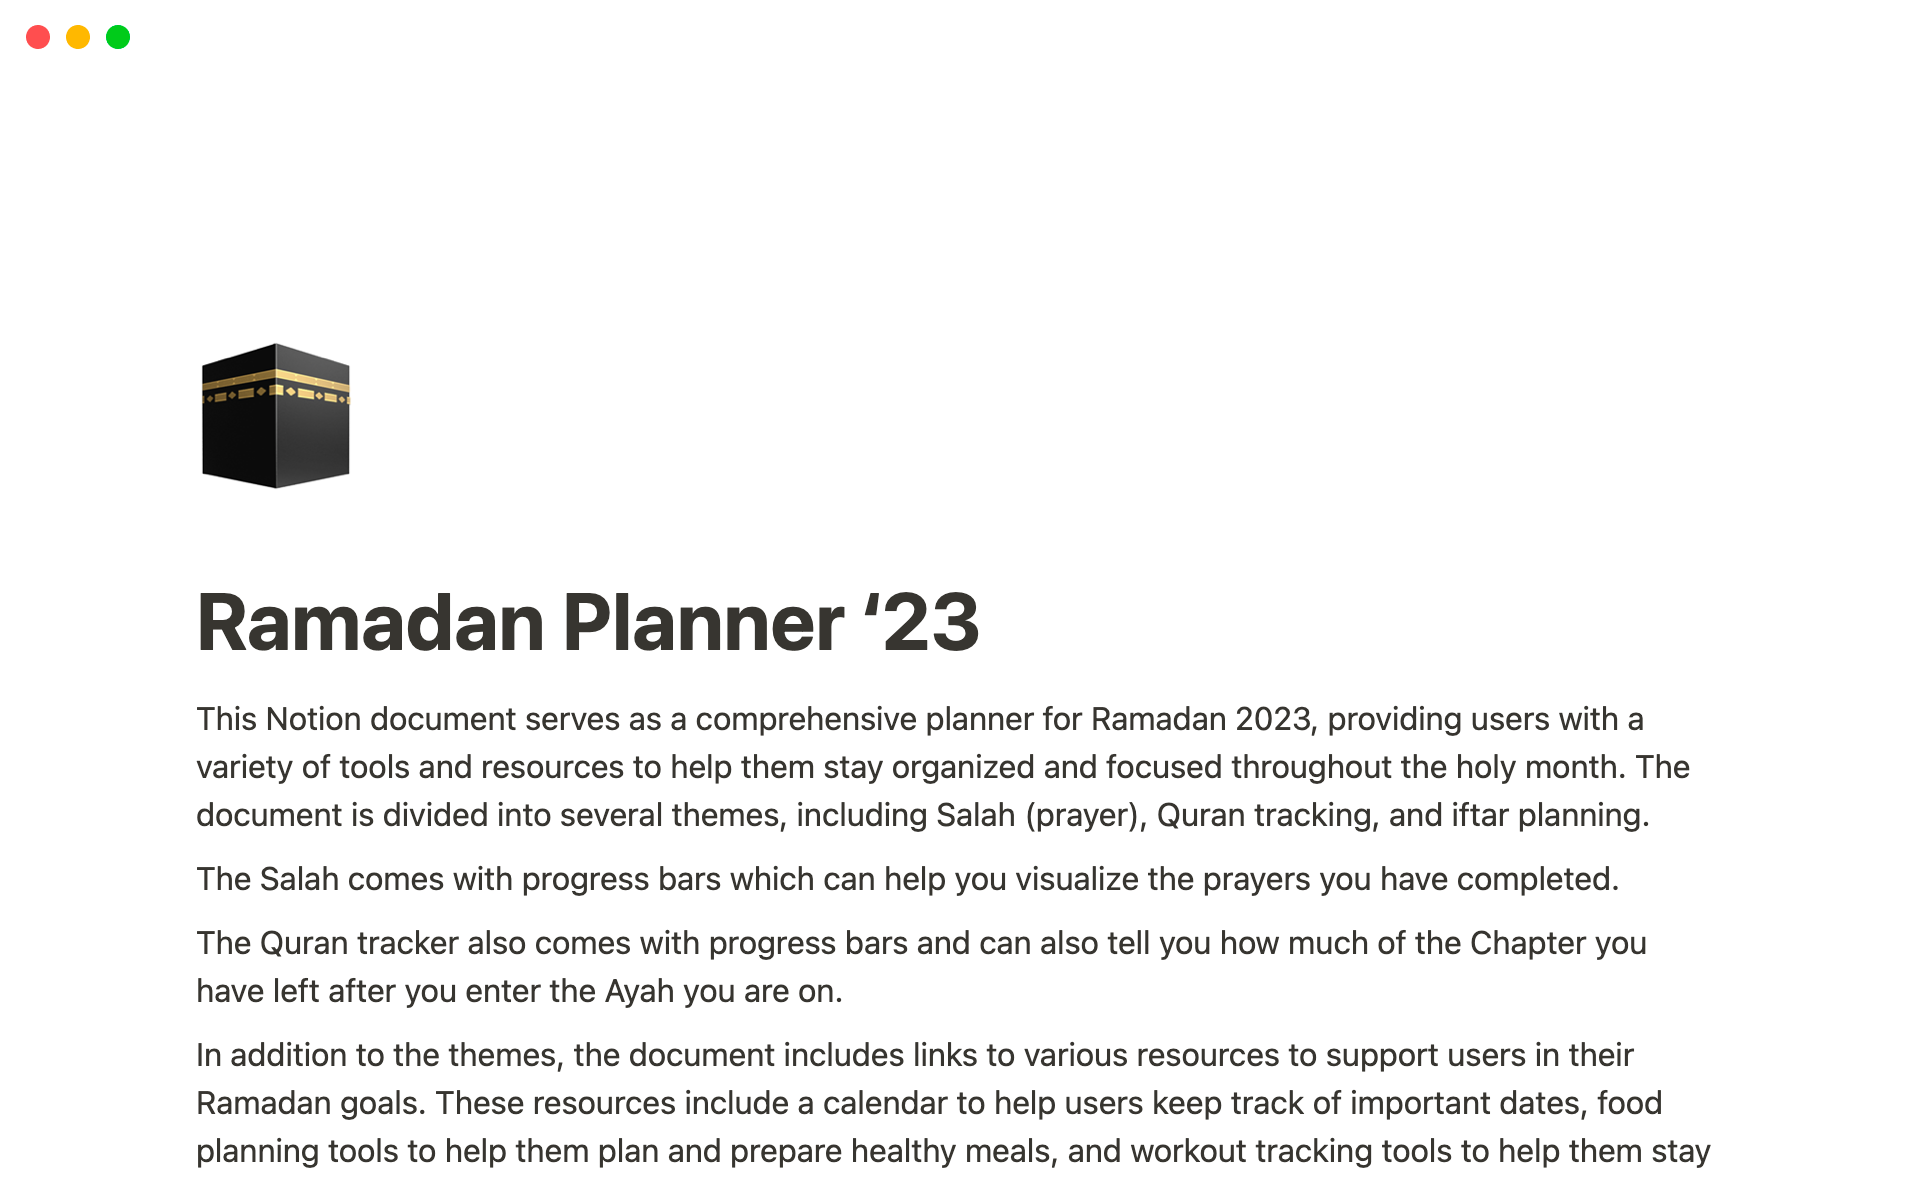 Comprehensive planner for Ramadan 2023, providing users with a variety of tools and resources to help them stay organized and focused throughout the holy month.